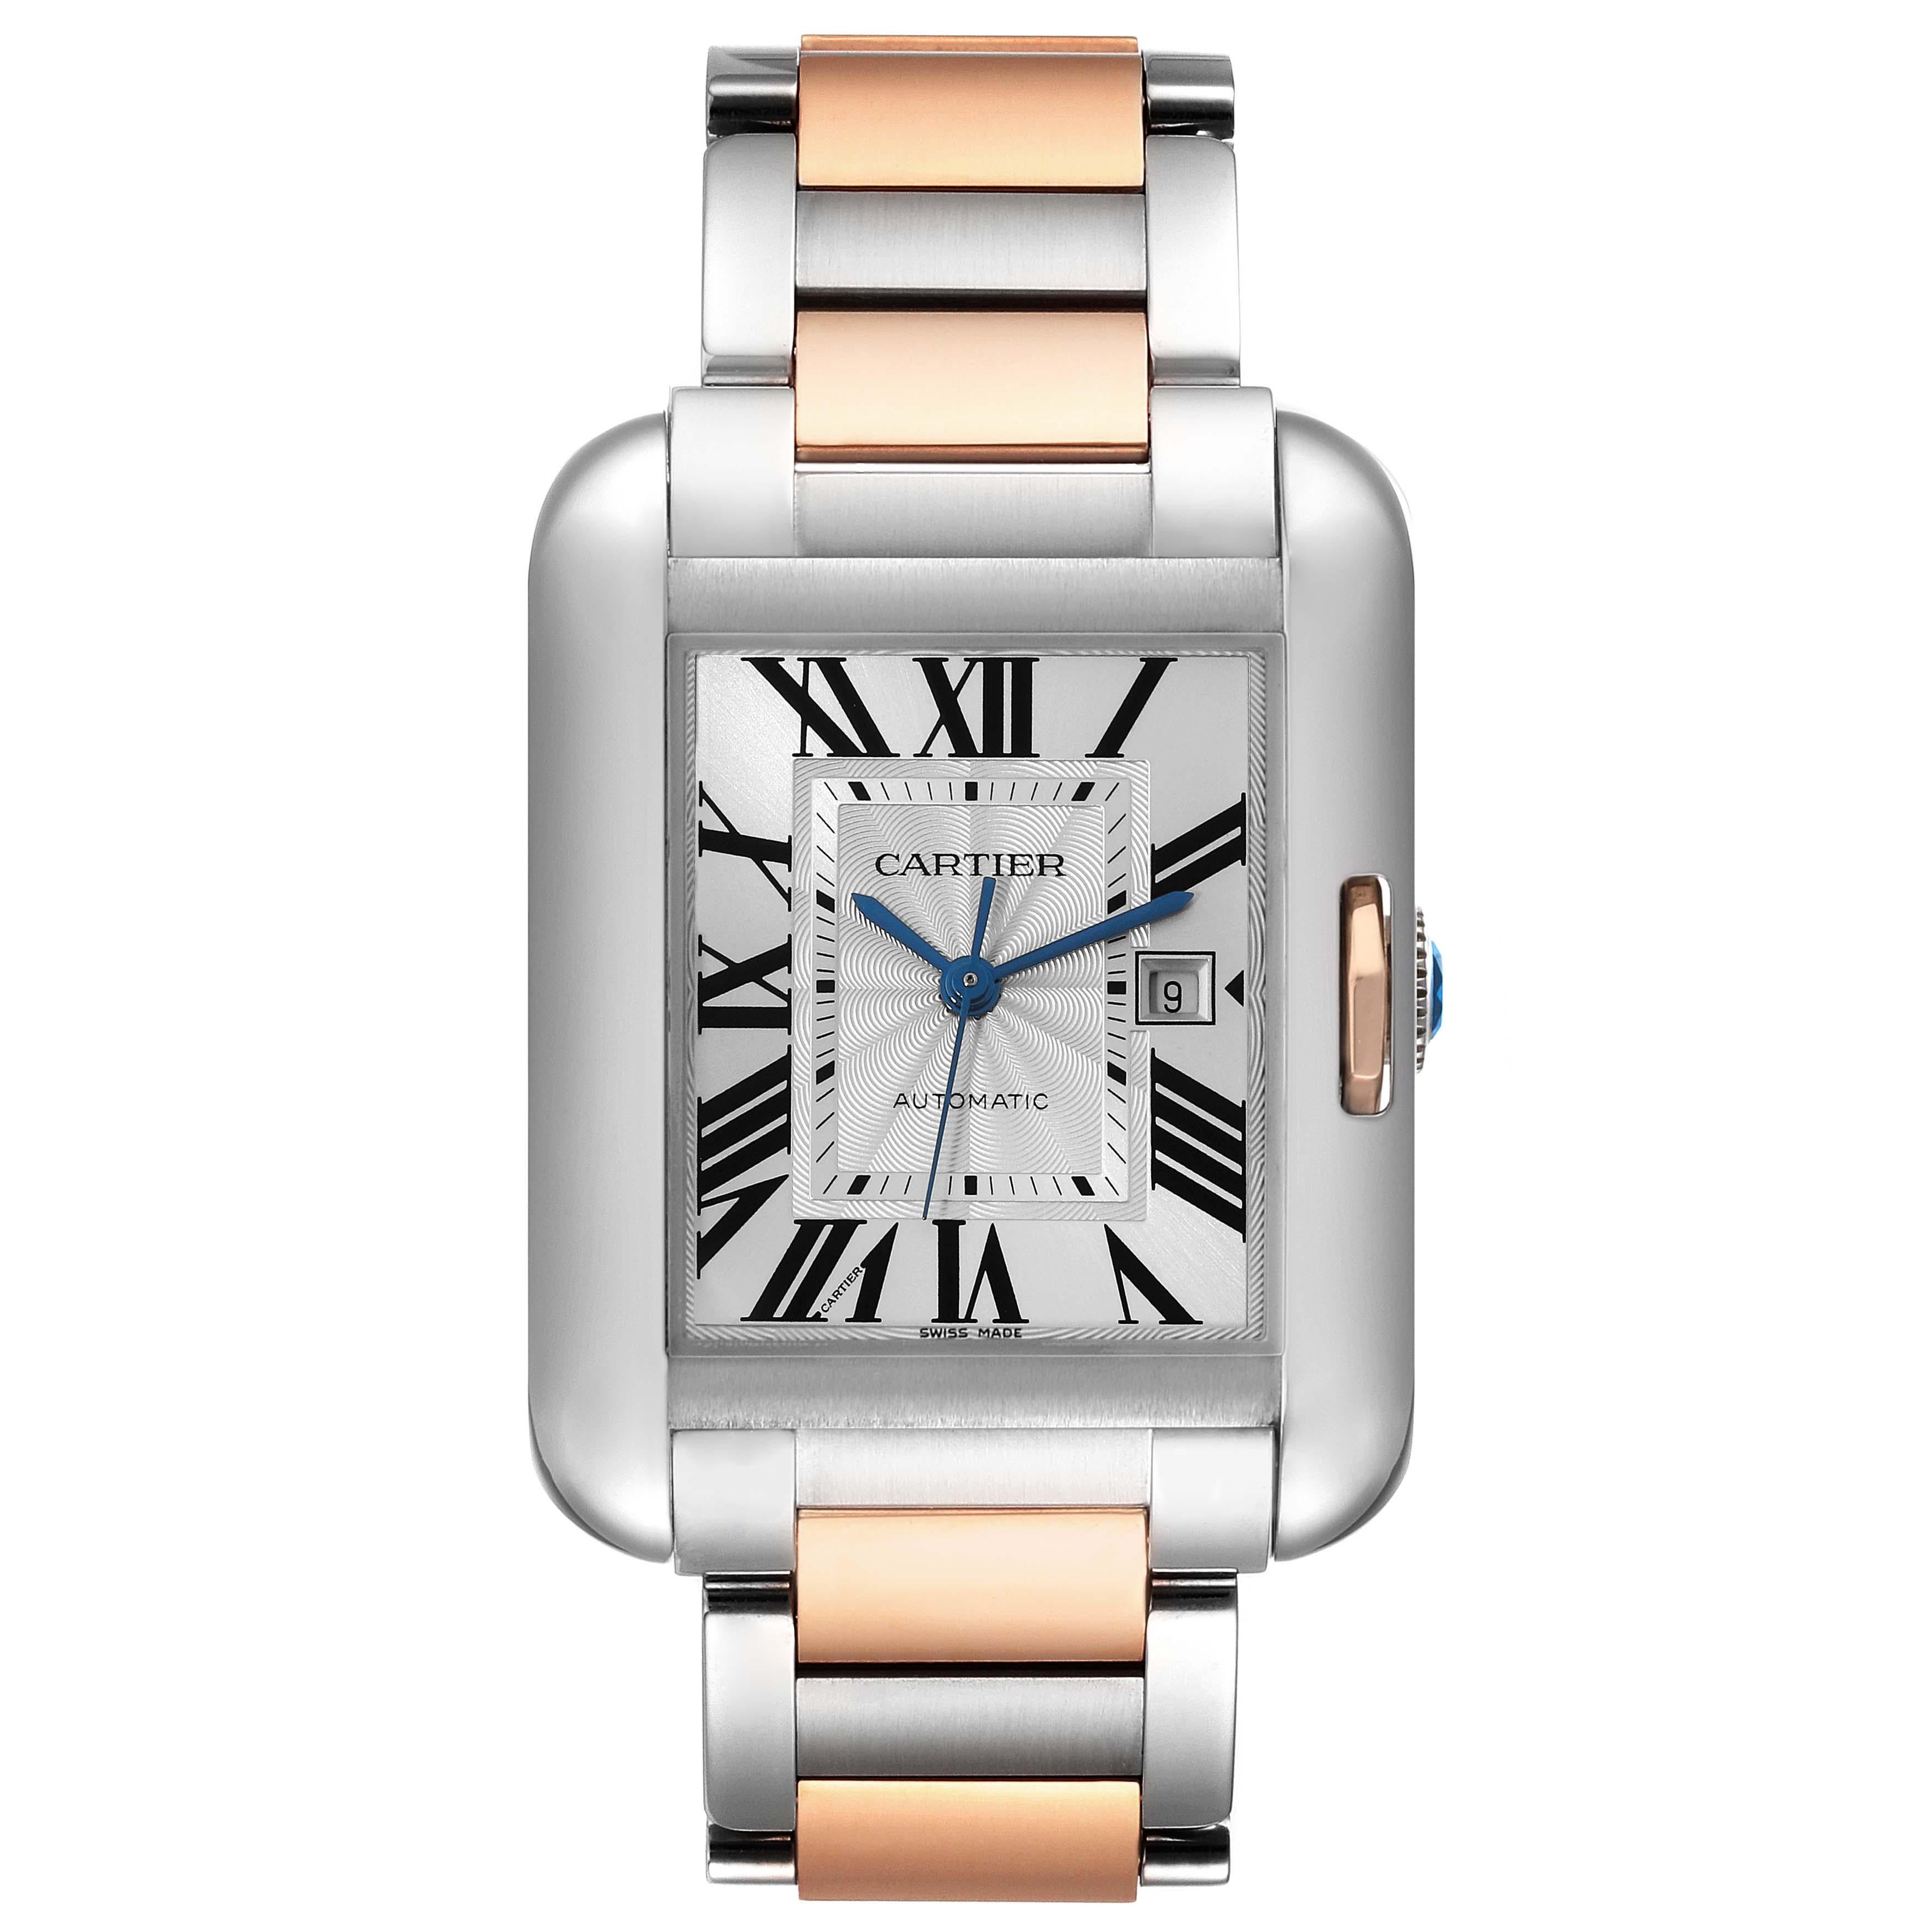 Cartier Tank Anglaise Large Steel Rose Gold Mens Watch W5310037. Automatic self-winding movement. Stainless steel and 18K rose gold rectangle case 39.2 mm x 29.8 mm. Case thickness: 9.5 mm. Crown set with a faceted blue spinel. . Scratch resistant